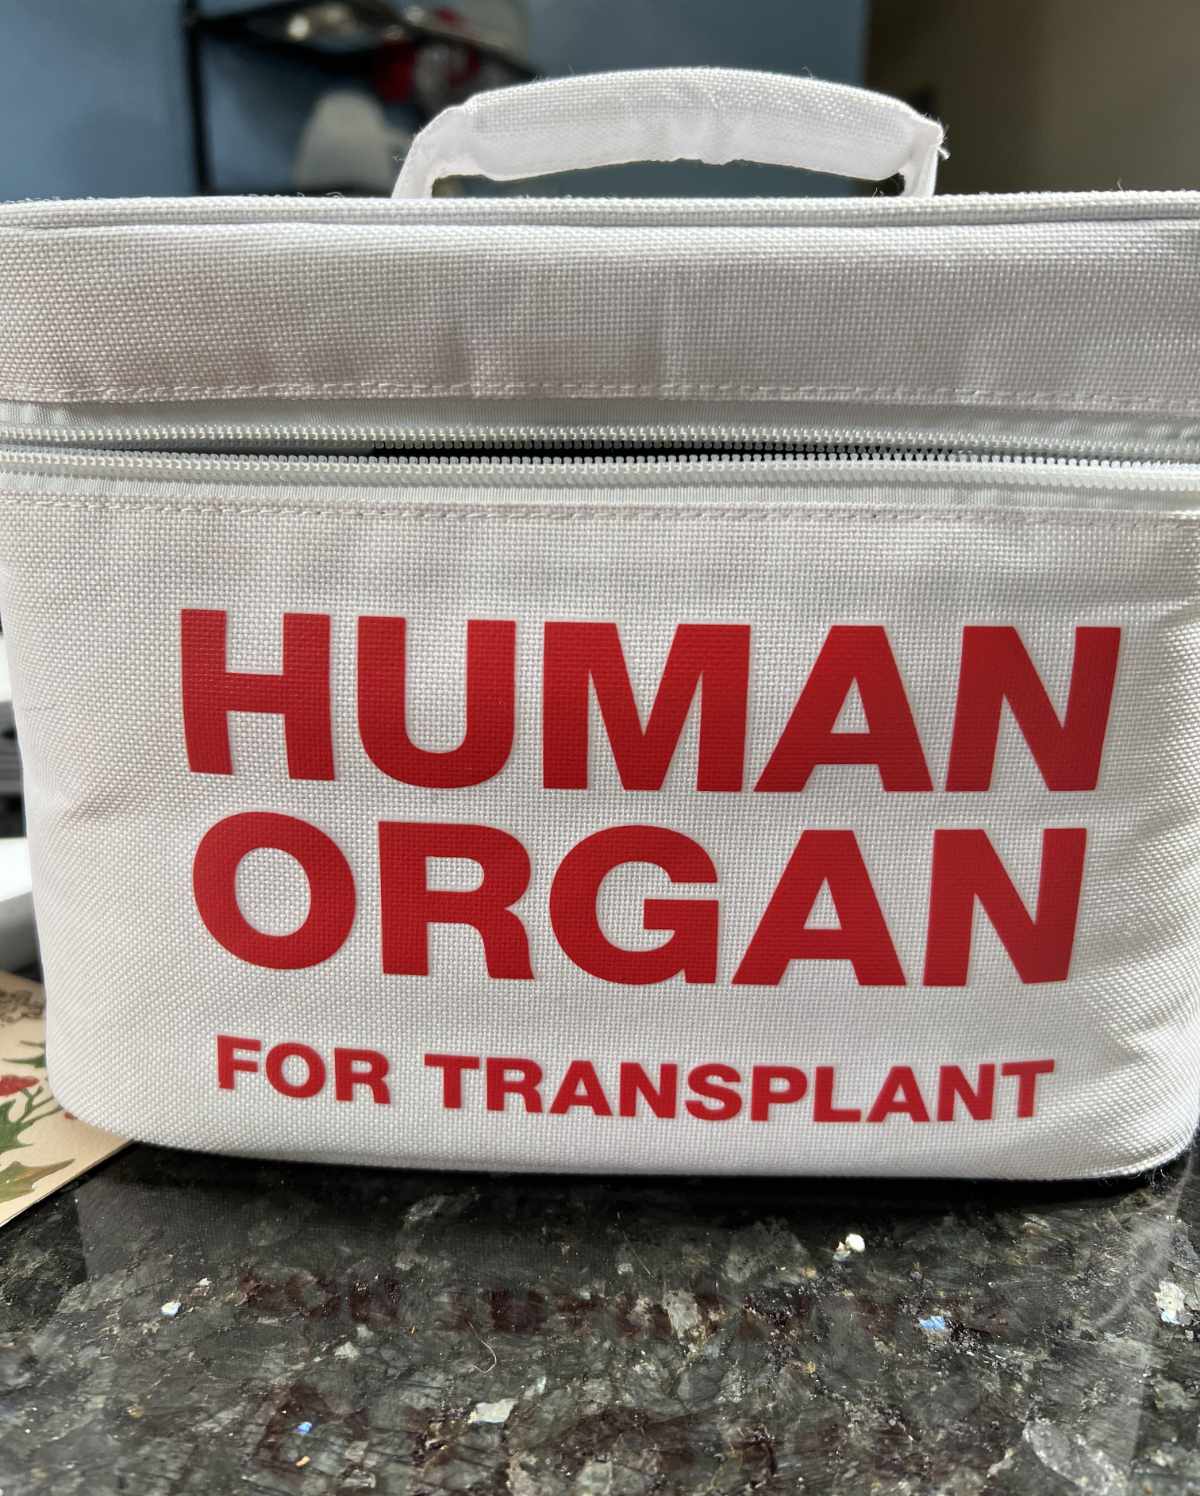 My wife is a nurse and this is her lunch box